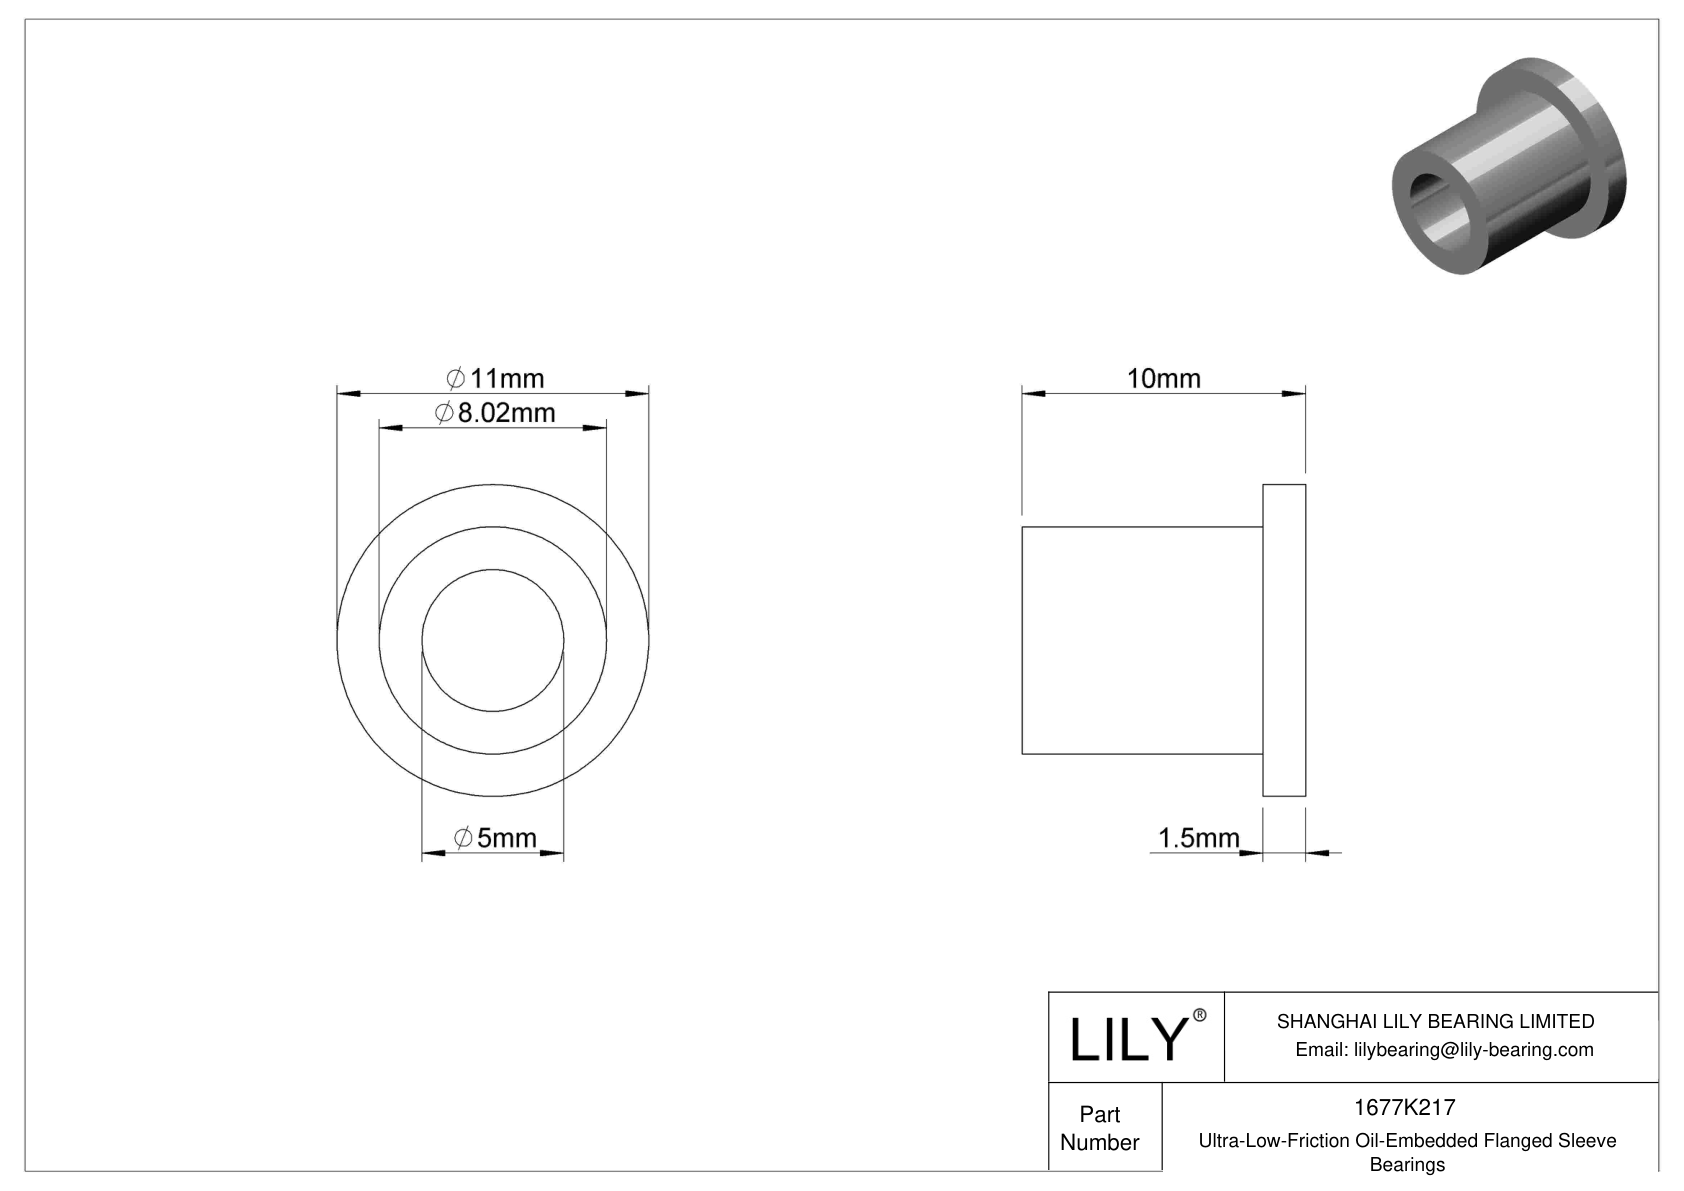 BGHHKCBH Ultra-Low-Friction Oil-Embedded Flanged Sleeve Bearings cad drawing